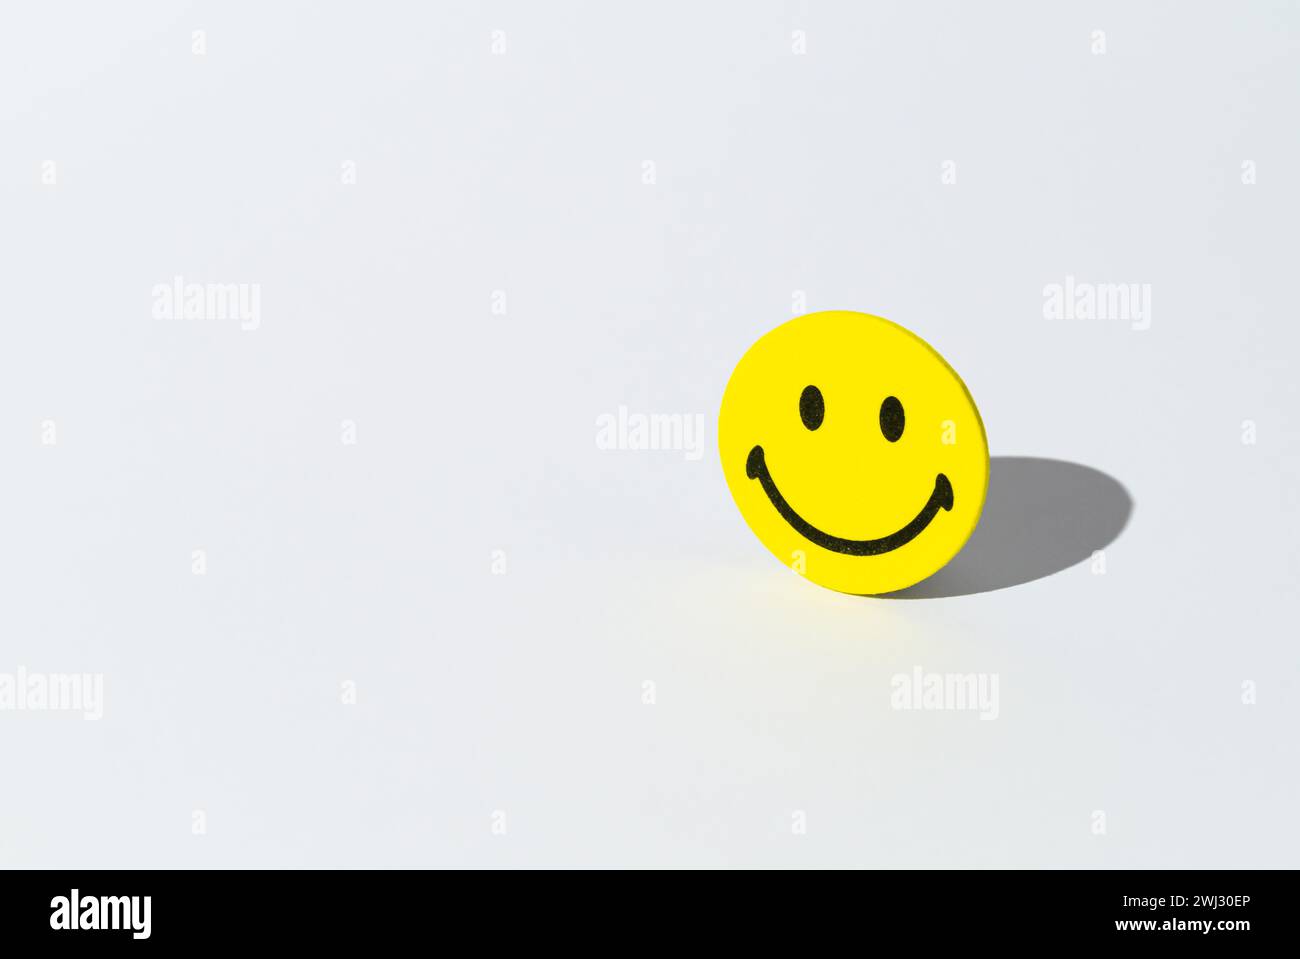 Creative layout made with smiley face sticker on white background. Minimal positive thinking and good mood concept. Mental care recovery idea. Stock Photo